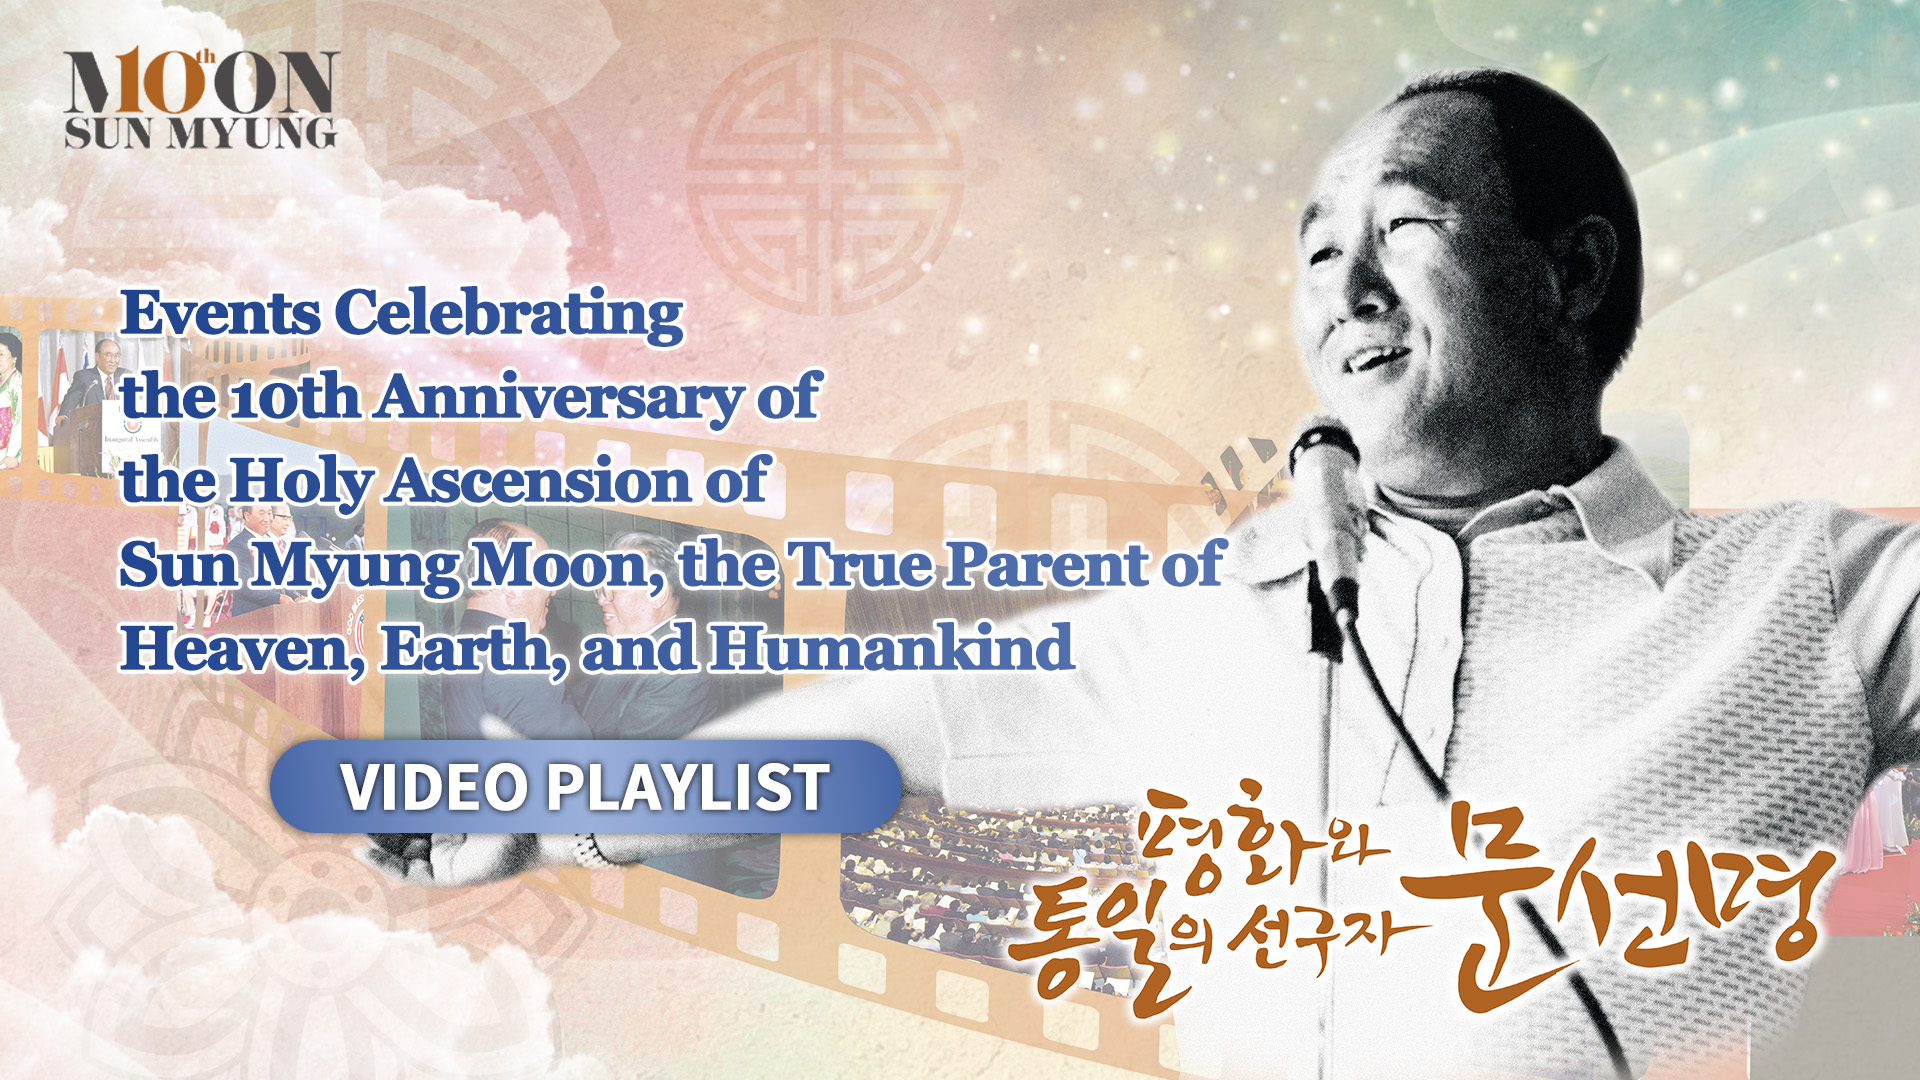 Seonghwa Festival Marking the 10th Anniversary of the Holy Ascension of True Father Sun Myung Moon